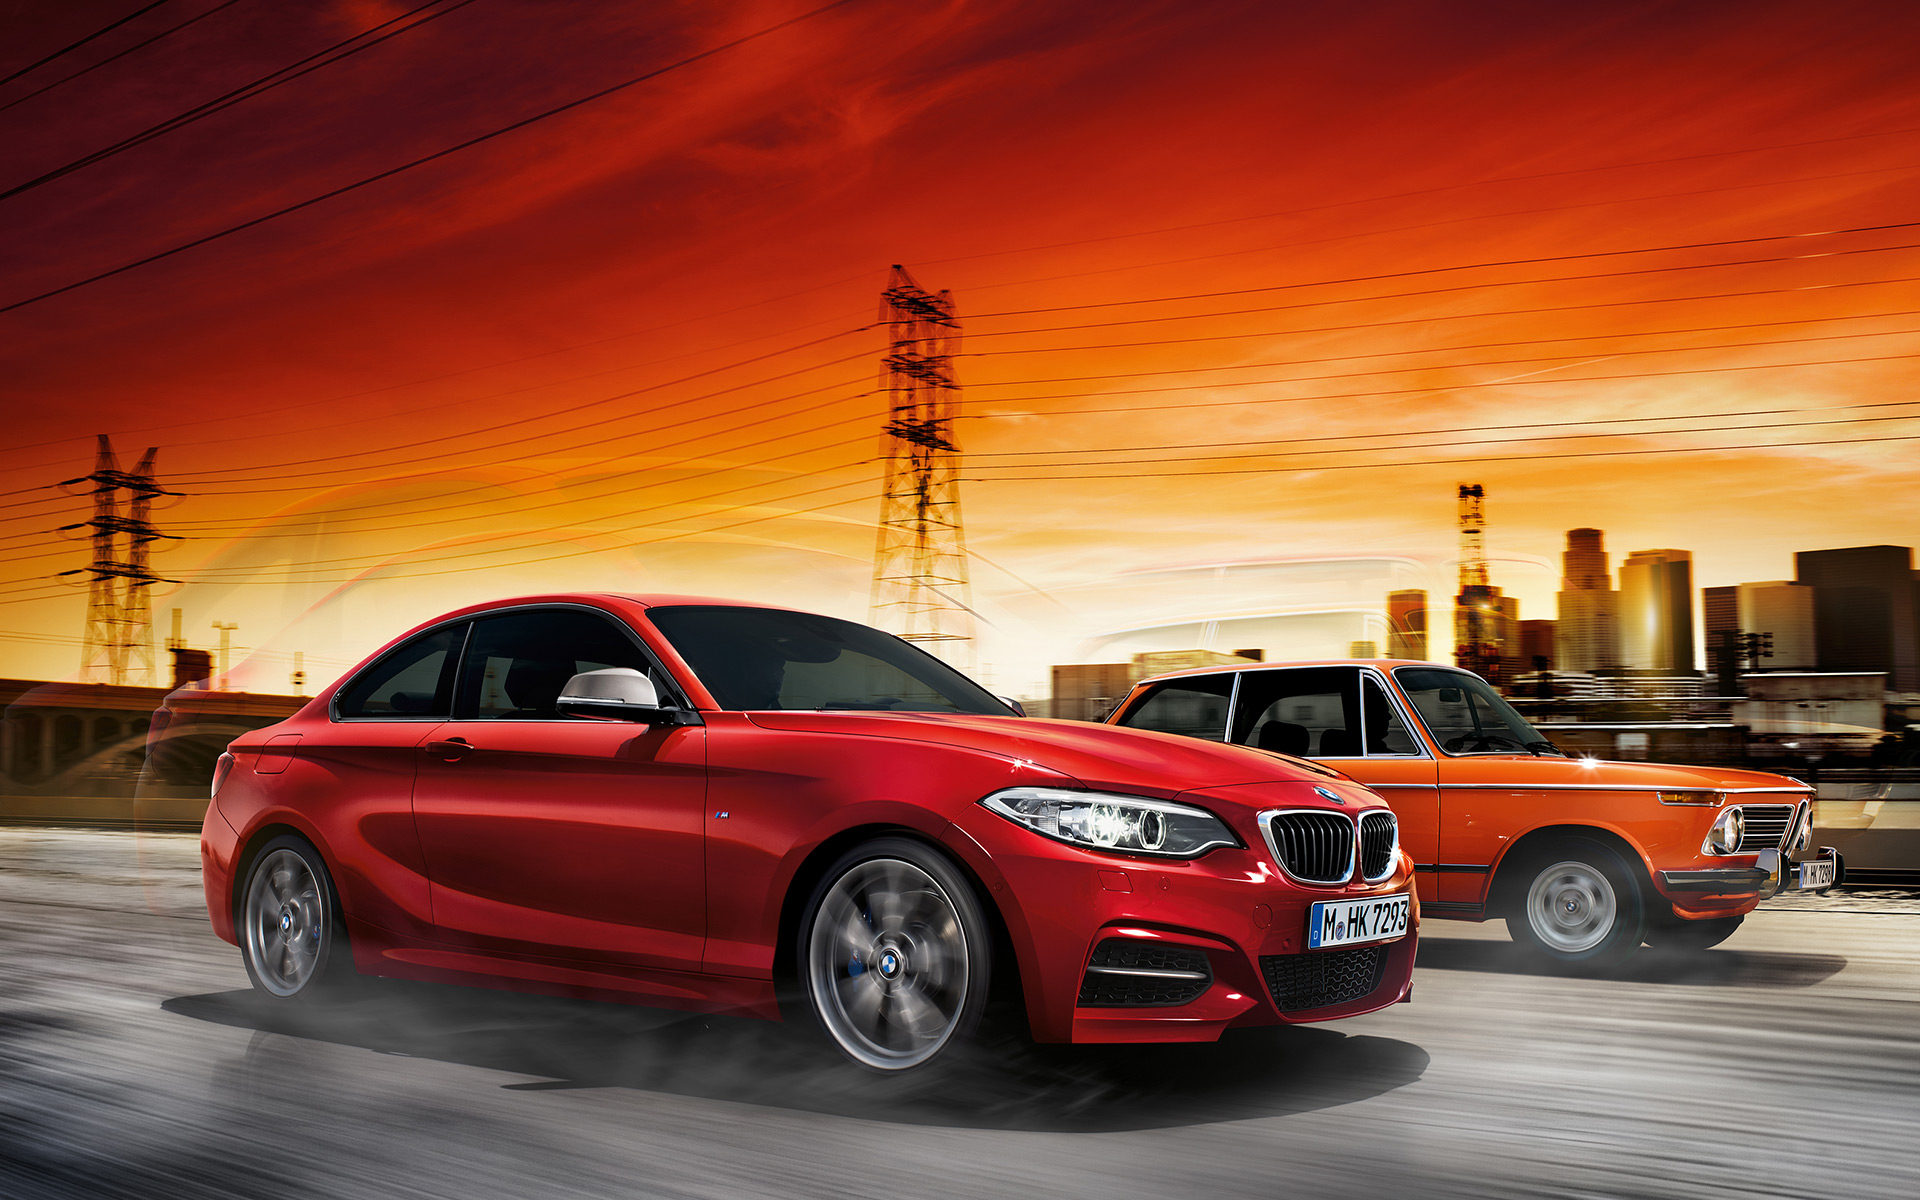 Your Own Bmw M235i Wallpaper Collection Is Here Photo Gallery